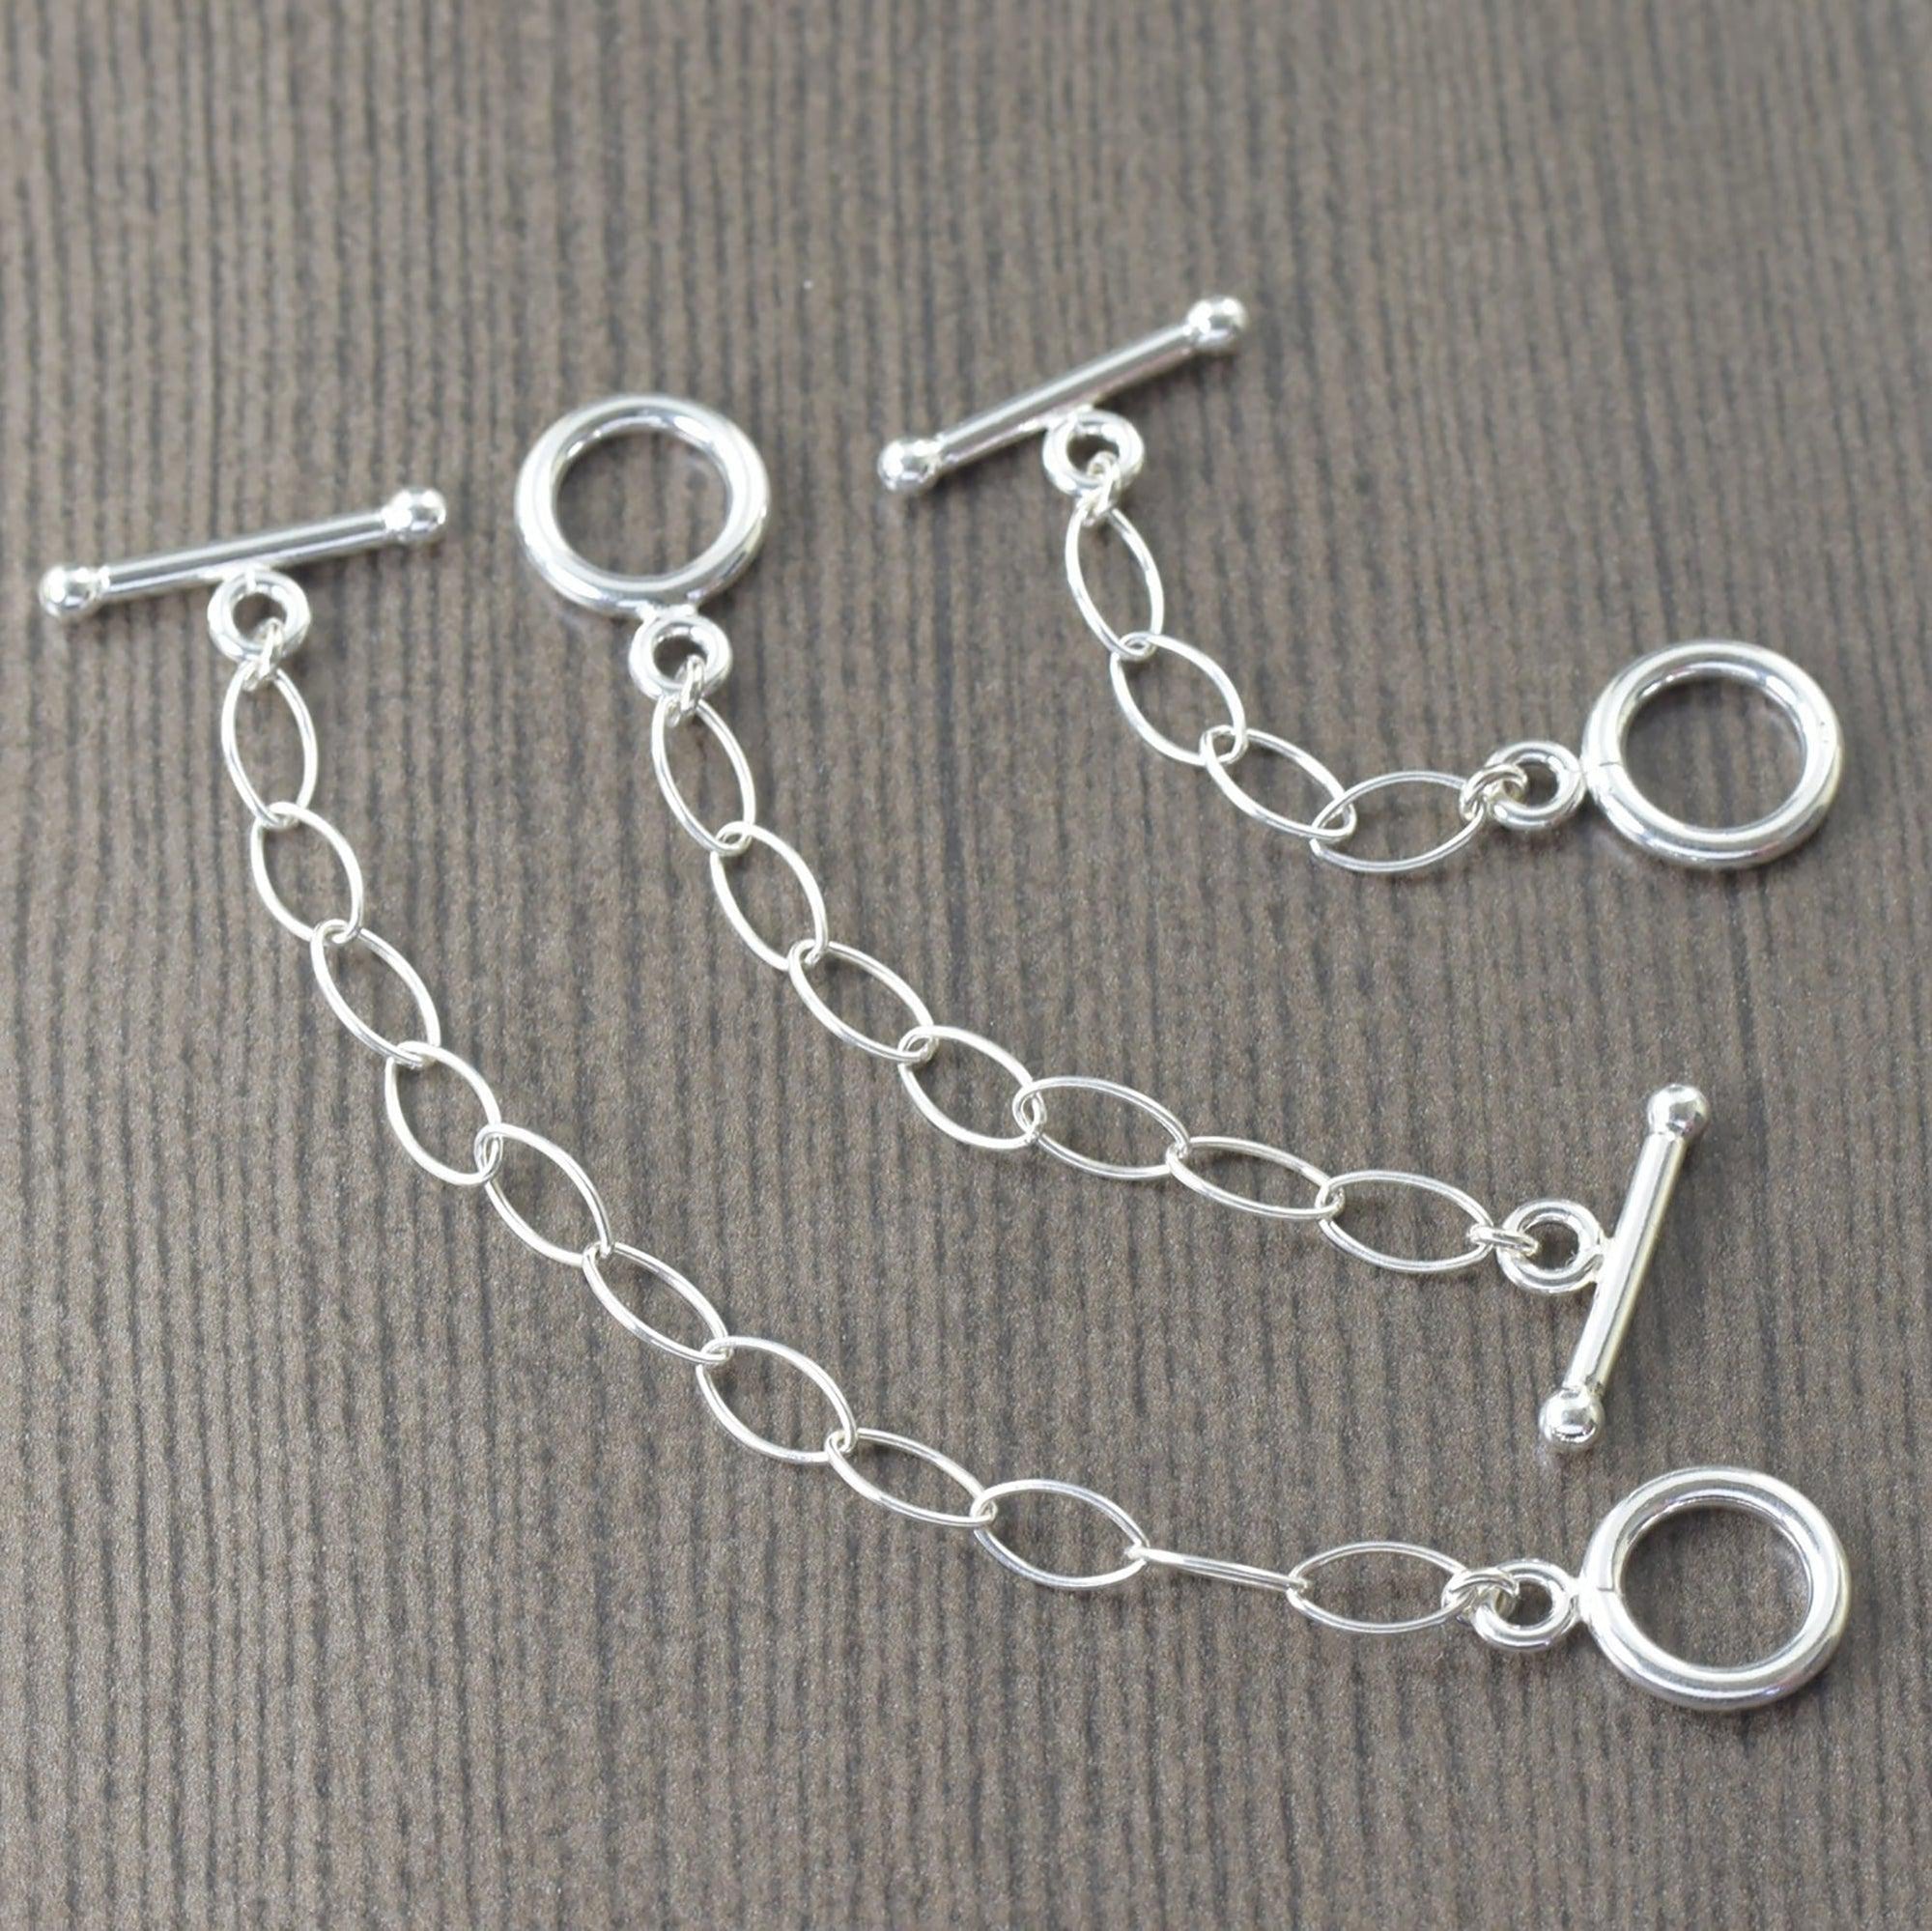 White Gold Necklace Extender Sterling Silver (1 2 3 inches)